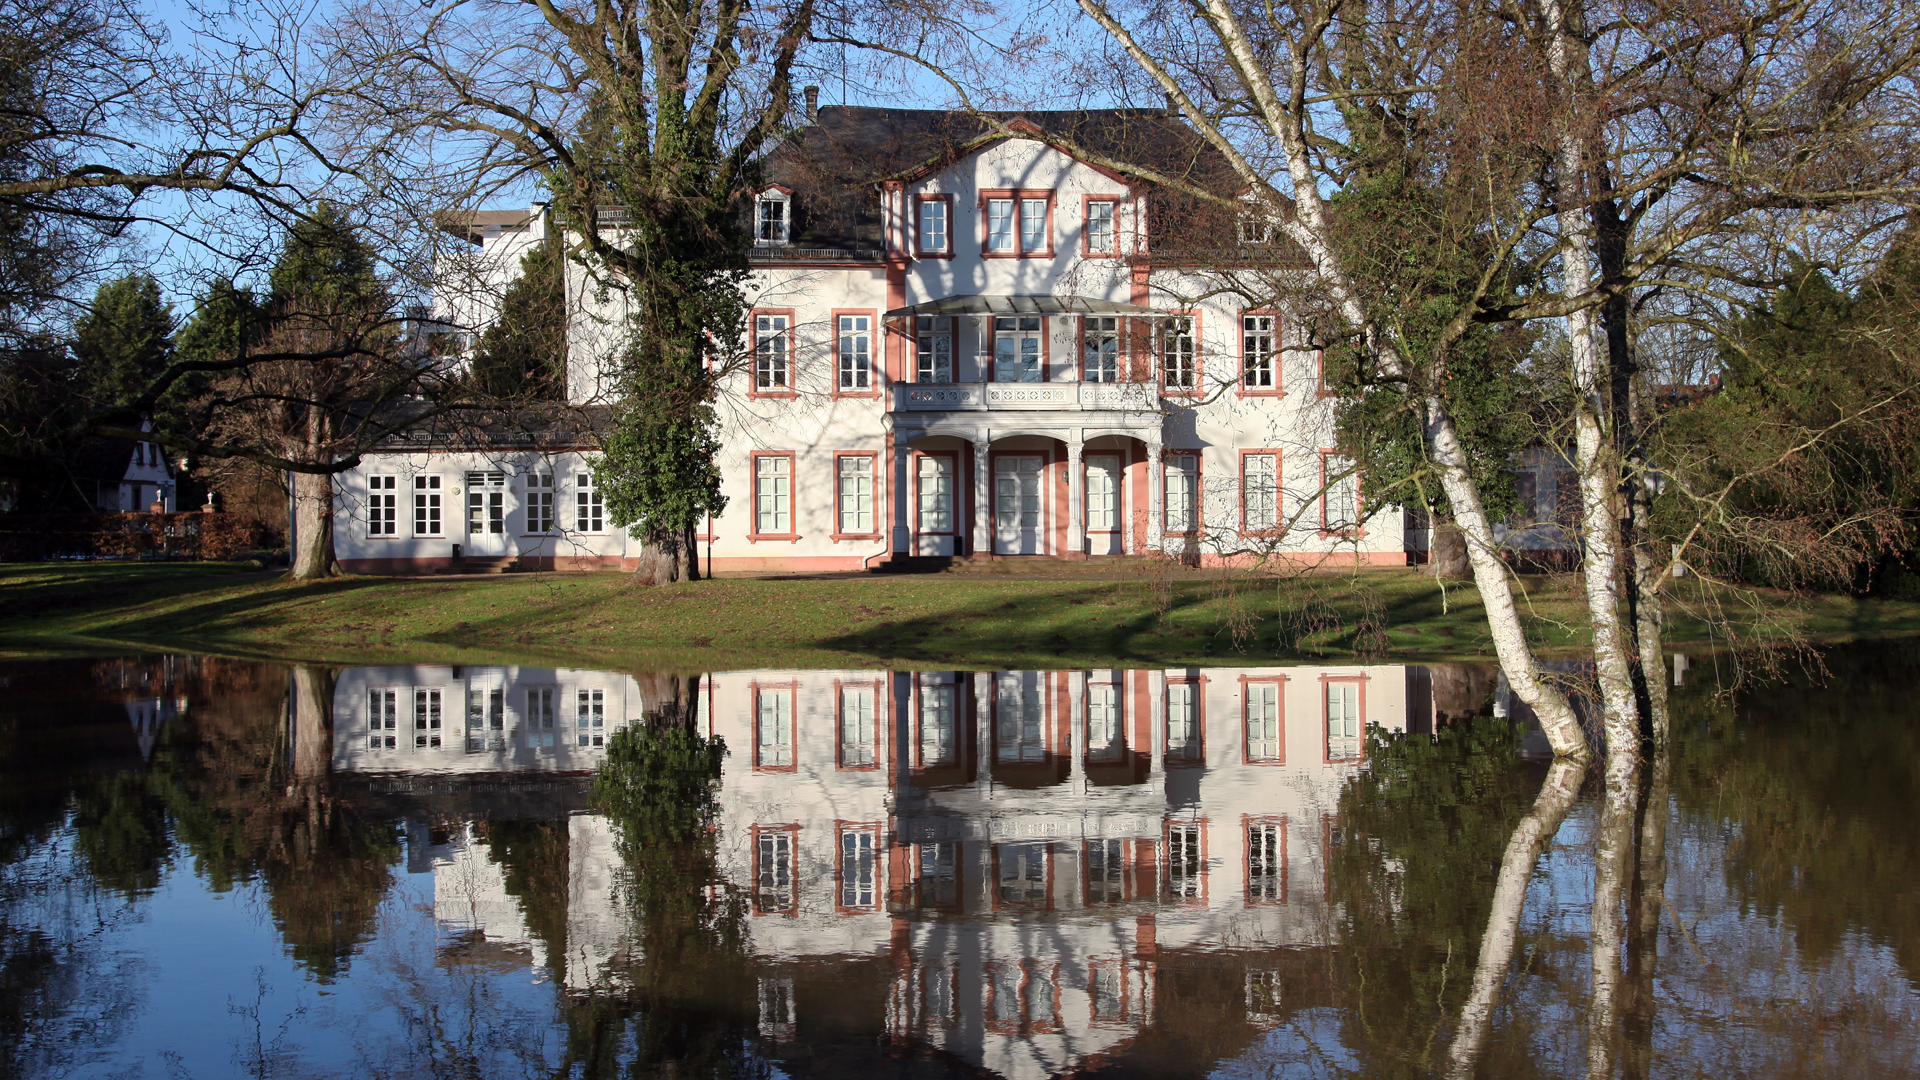 A photo of the exterior of a large, luxury home with a flooded front yard.